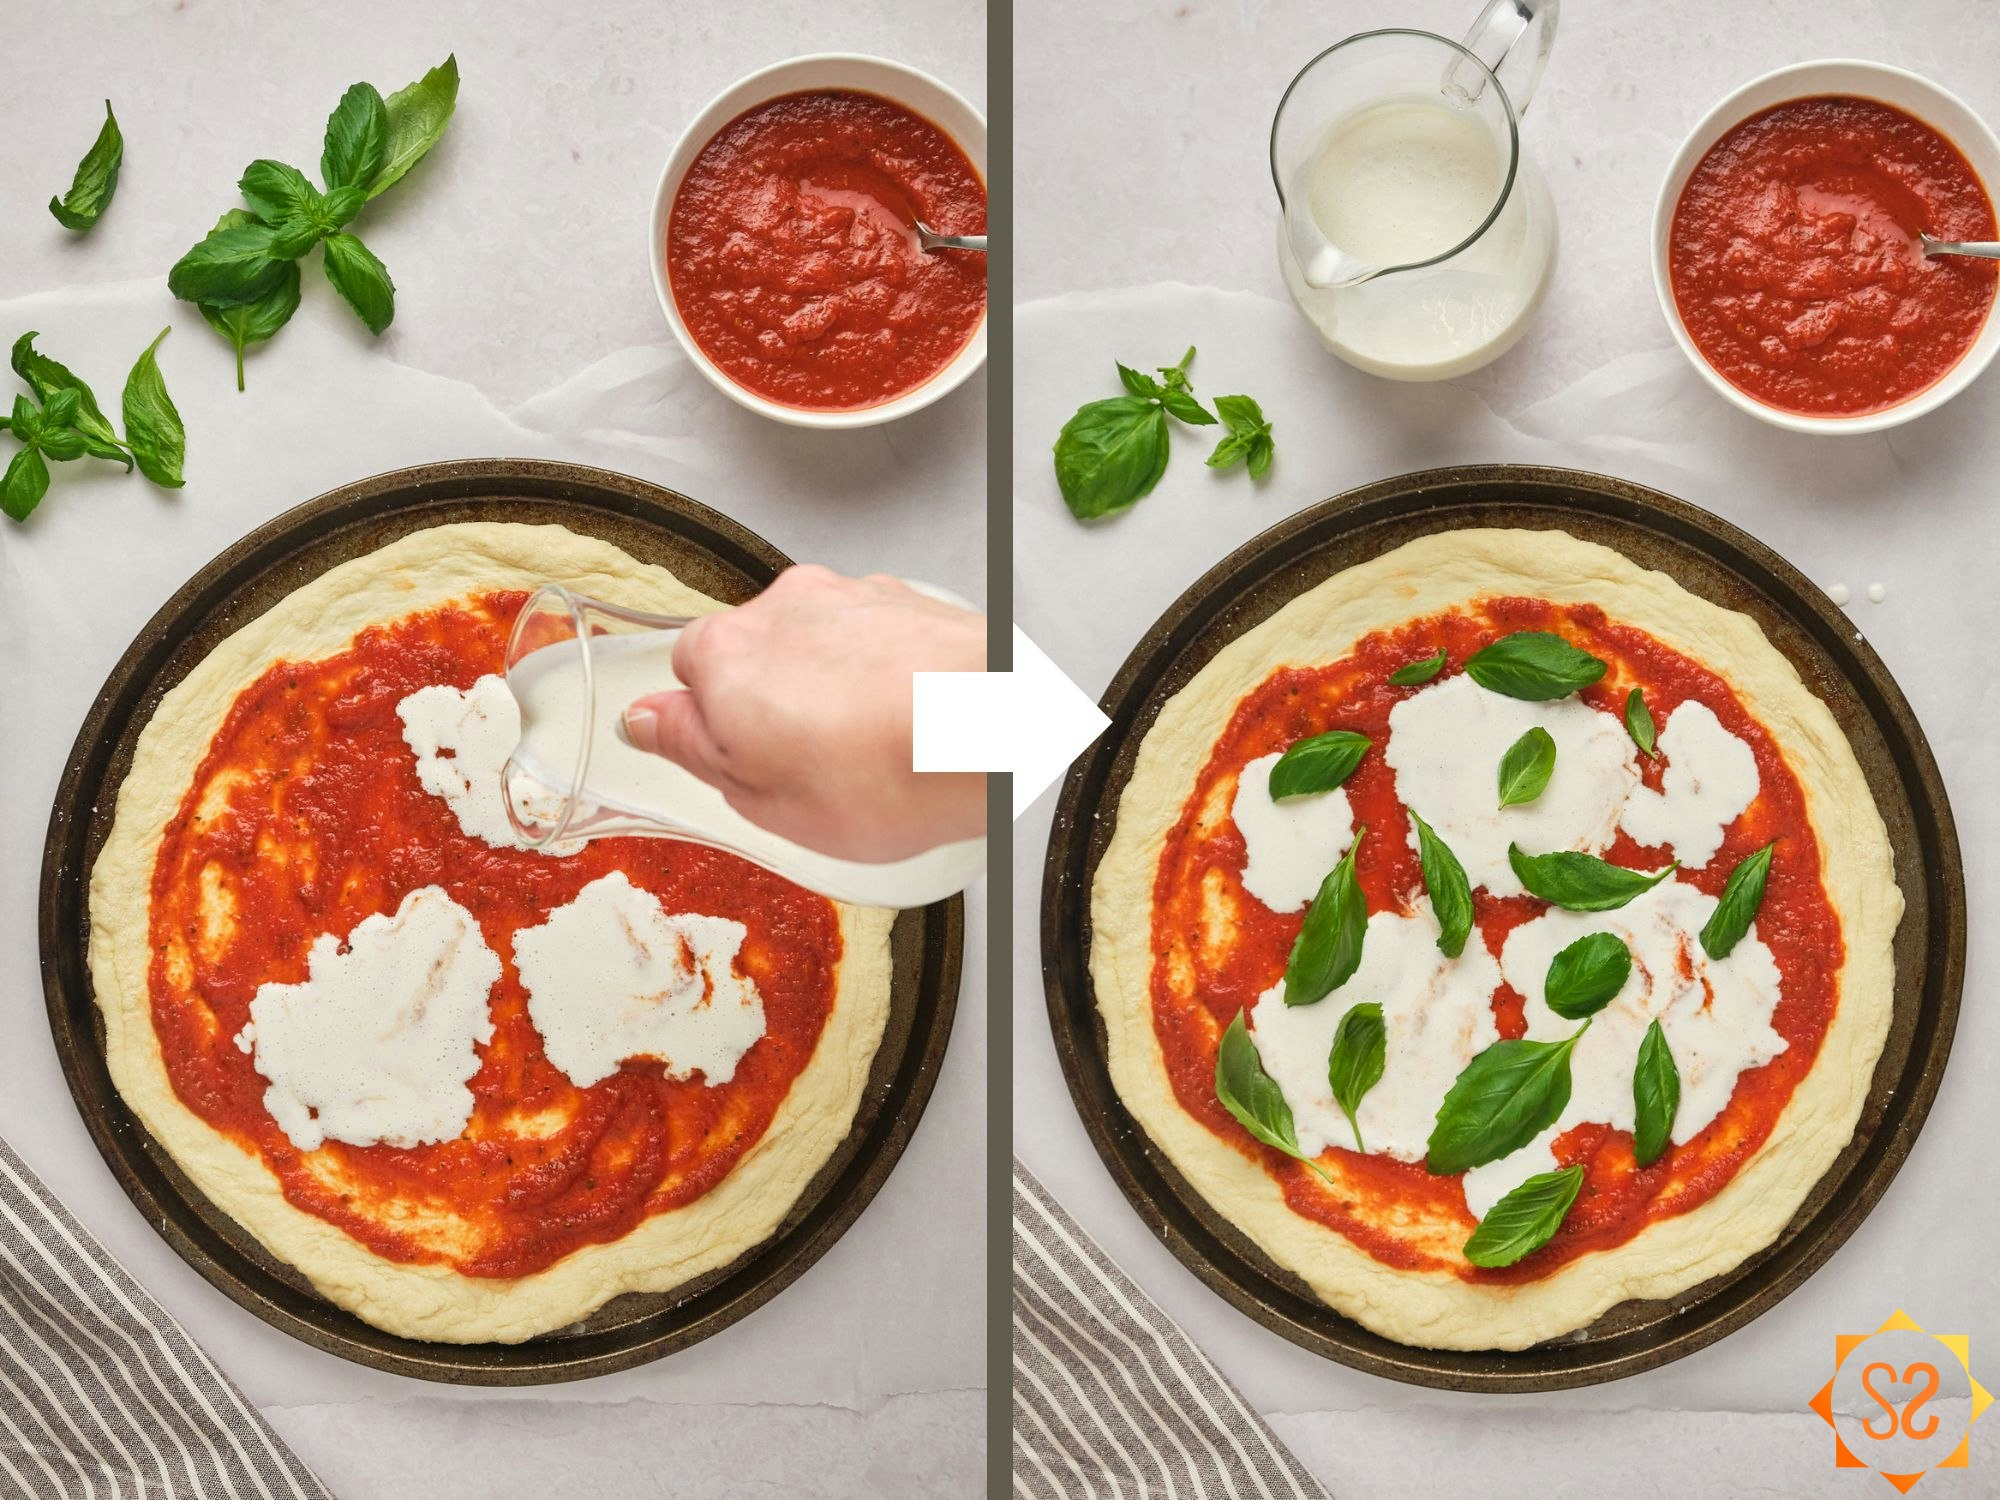 Left: a hand pouring vegan liquid mozzarella over an unbaked pizza; Right: the same pizza topped with basil leaves.